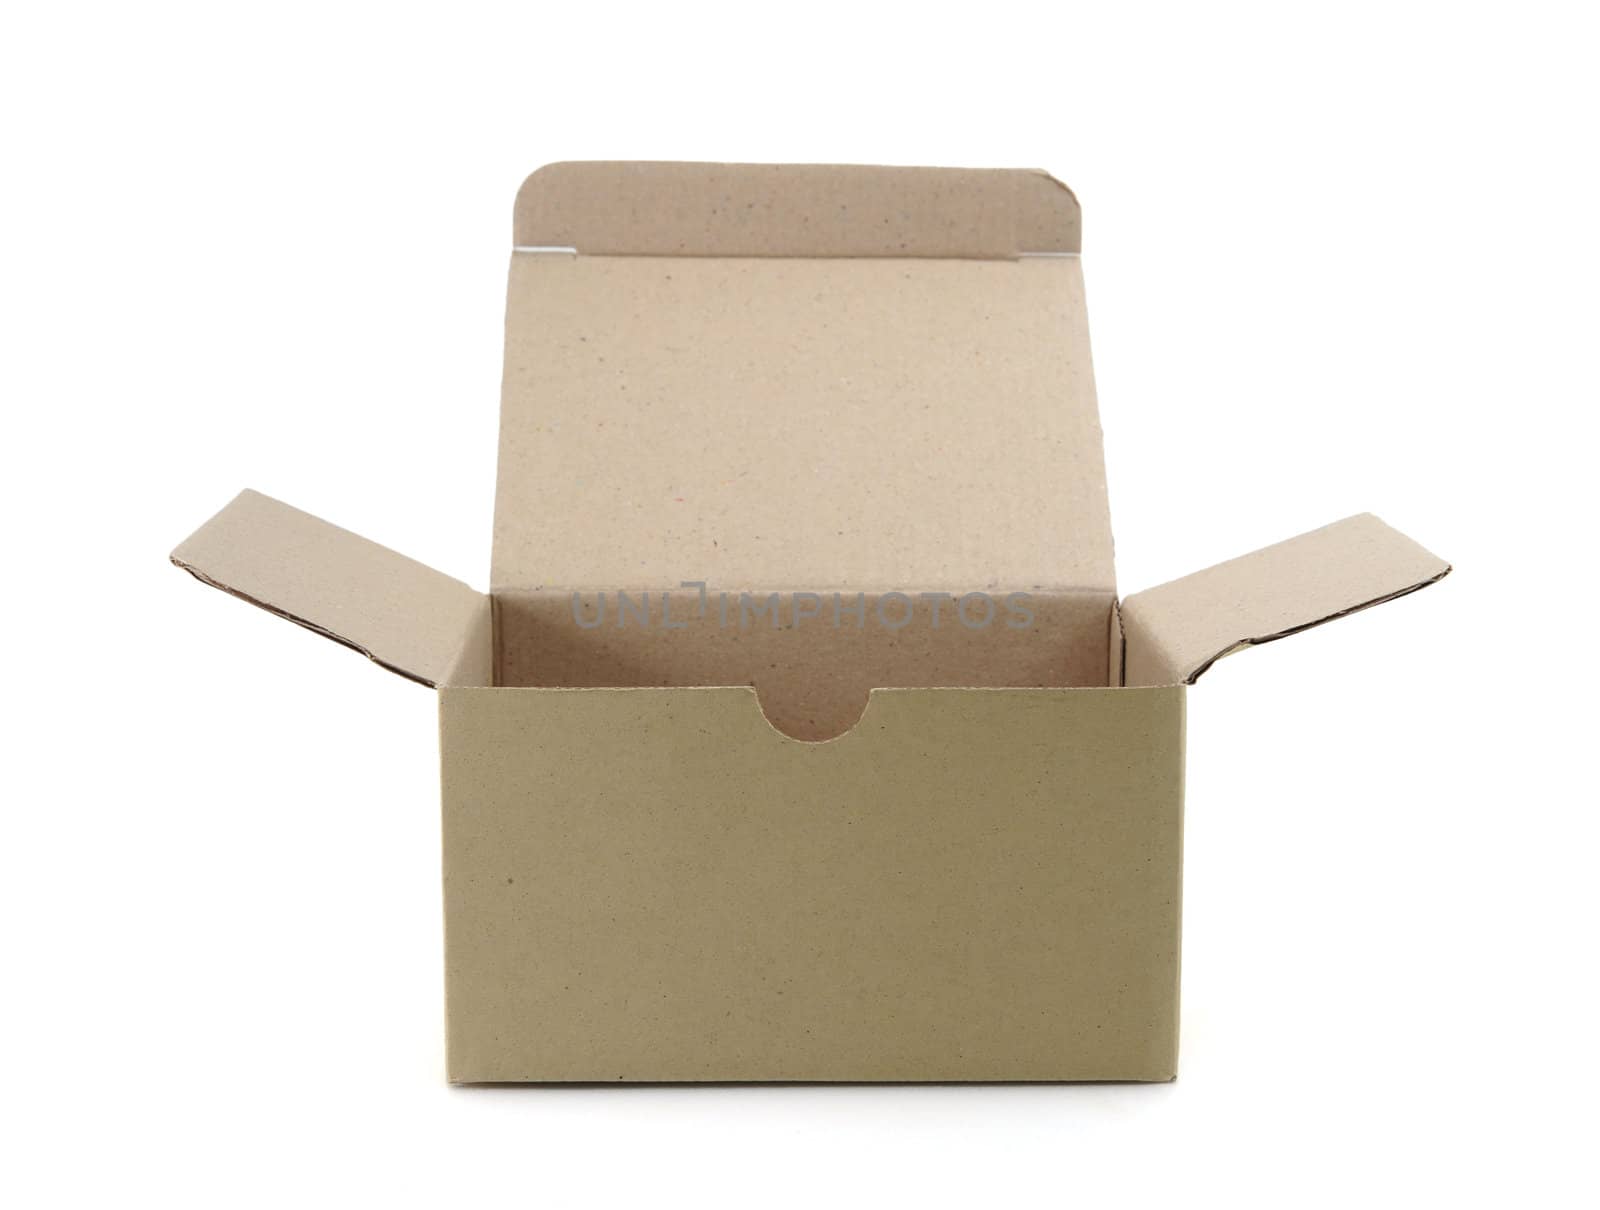 Cardboard box with clipping path